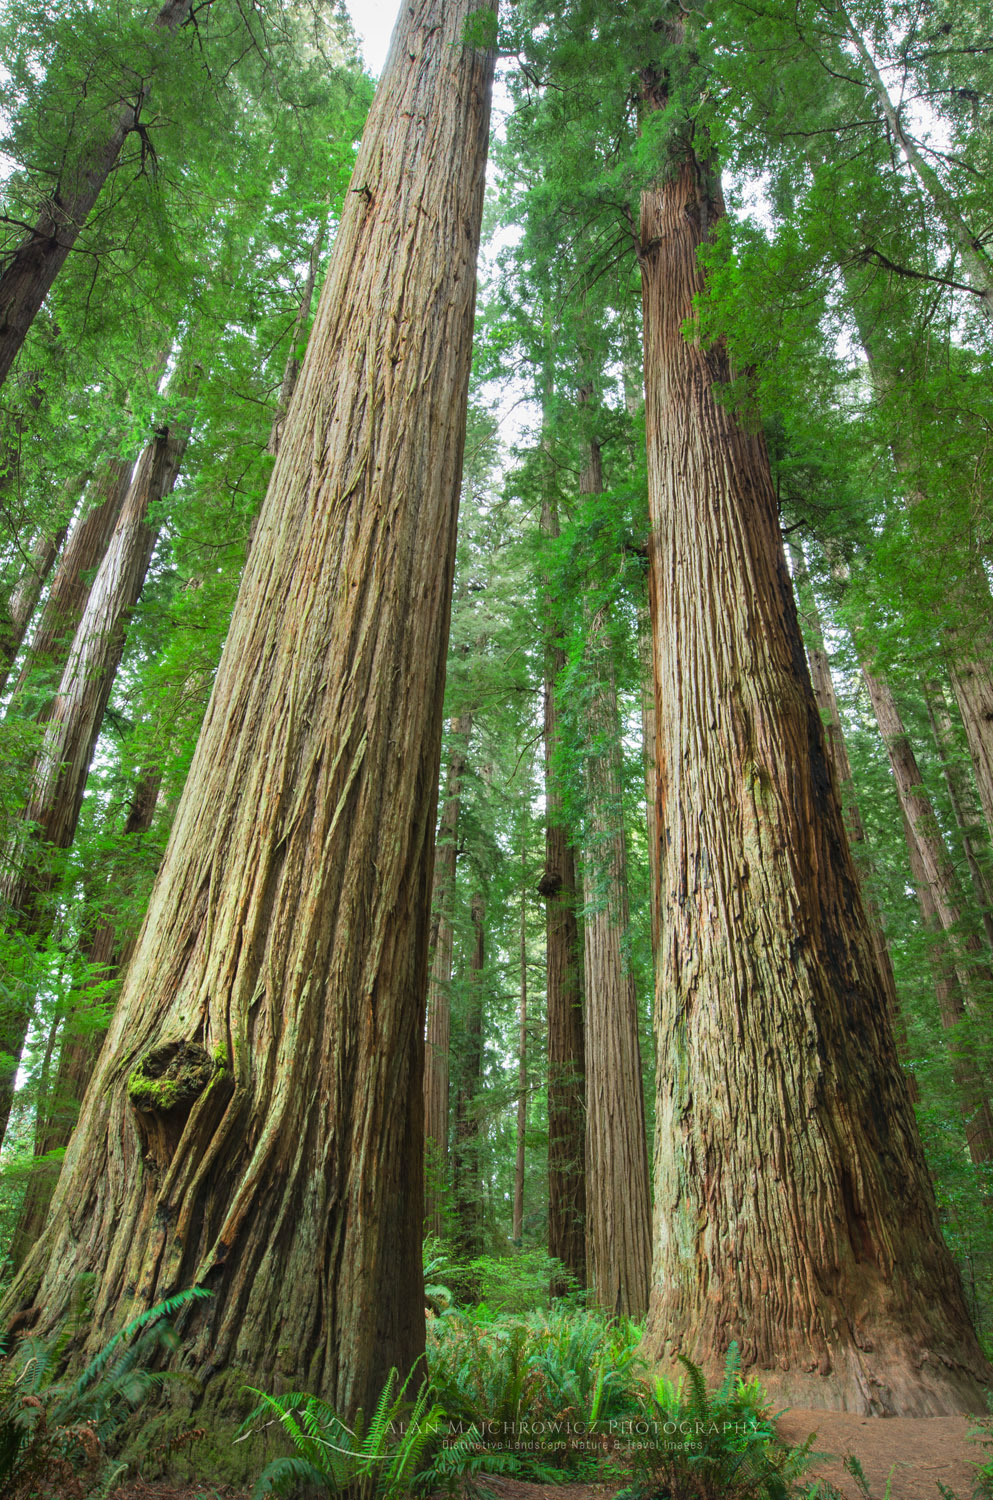 Ancient Redwoods (Sequoia sempervirens) of the Stout Grove in Jedidiah Smith Redwoods State Park California #44497